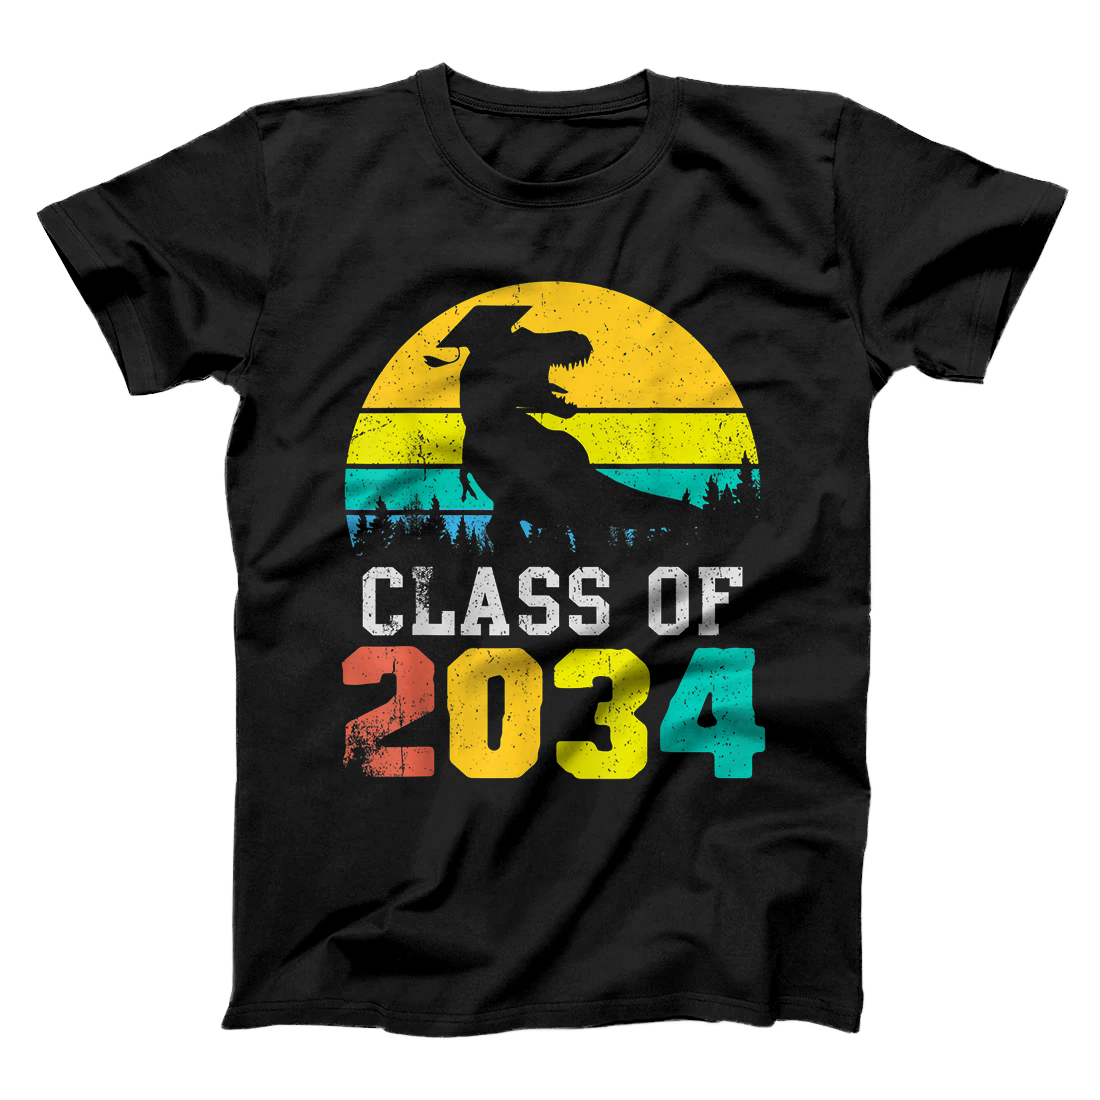 Personalized Funny Dinosaur T Rex Class Of 2034 First Day Pre-K Boys Kids T-Shirt